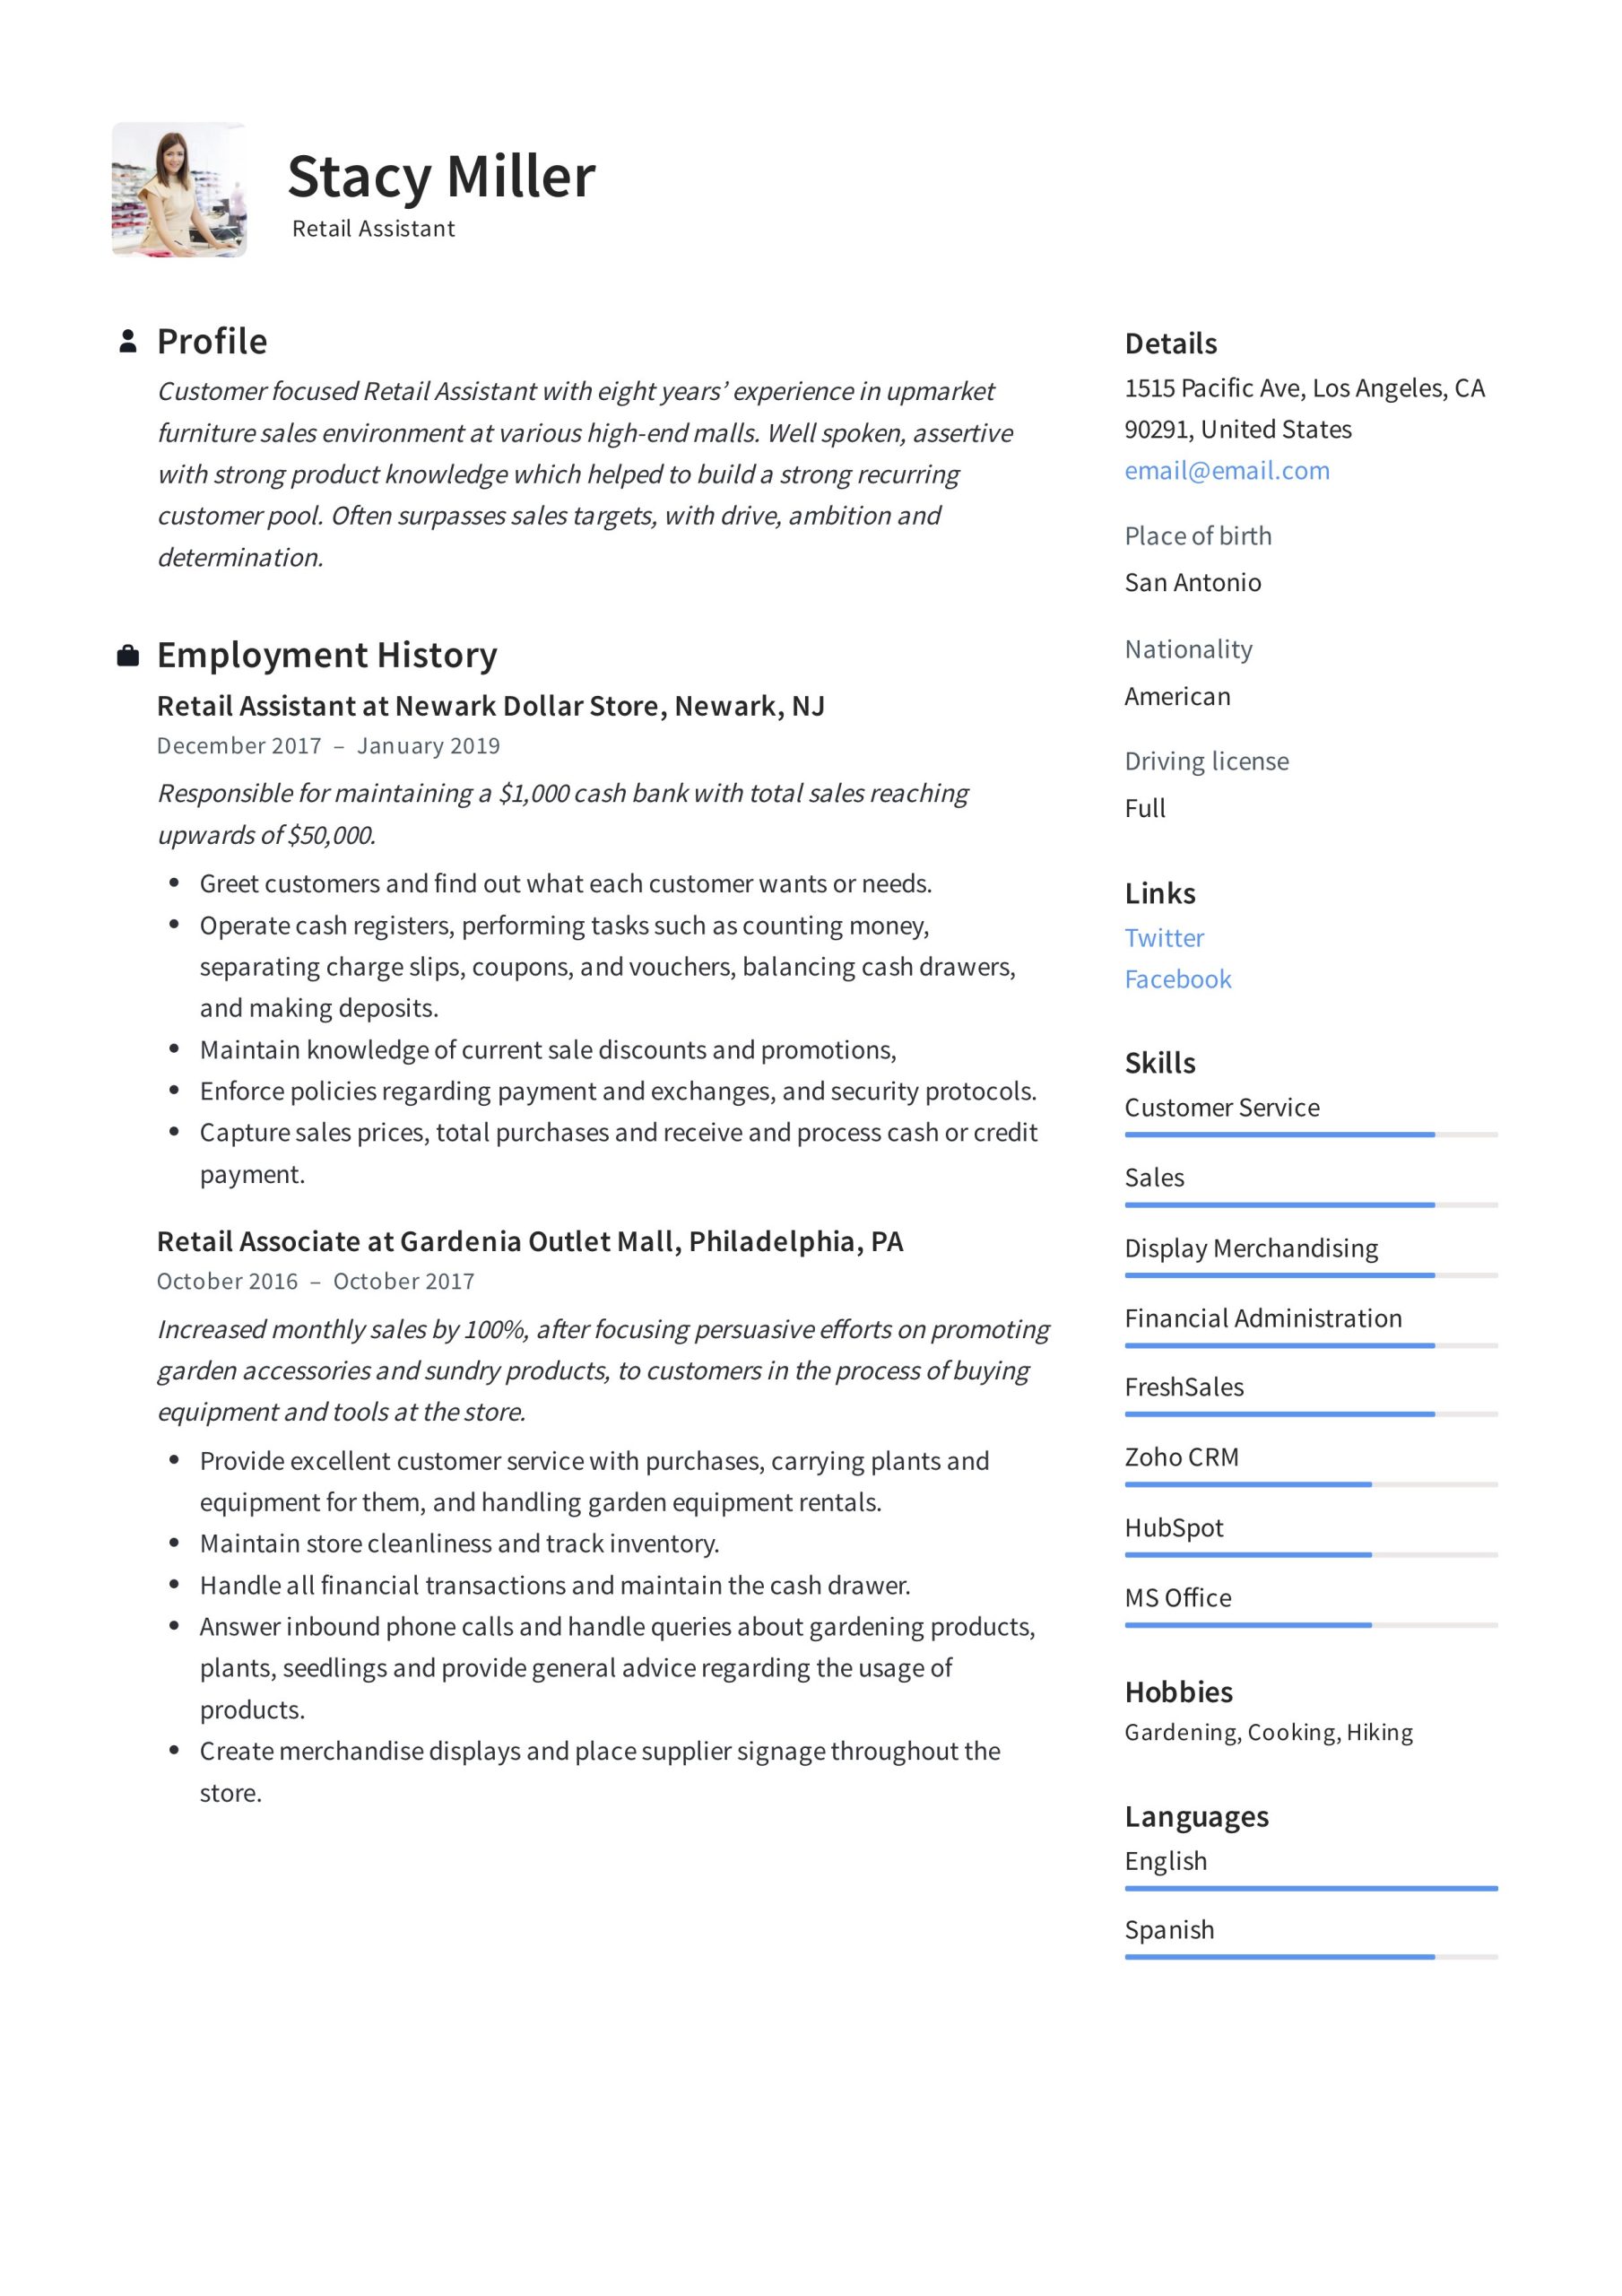 Sample Resume for High End Retail Position 12 Retail assistant Resume Samples & Writing Guide – Resumeviking.com